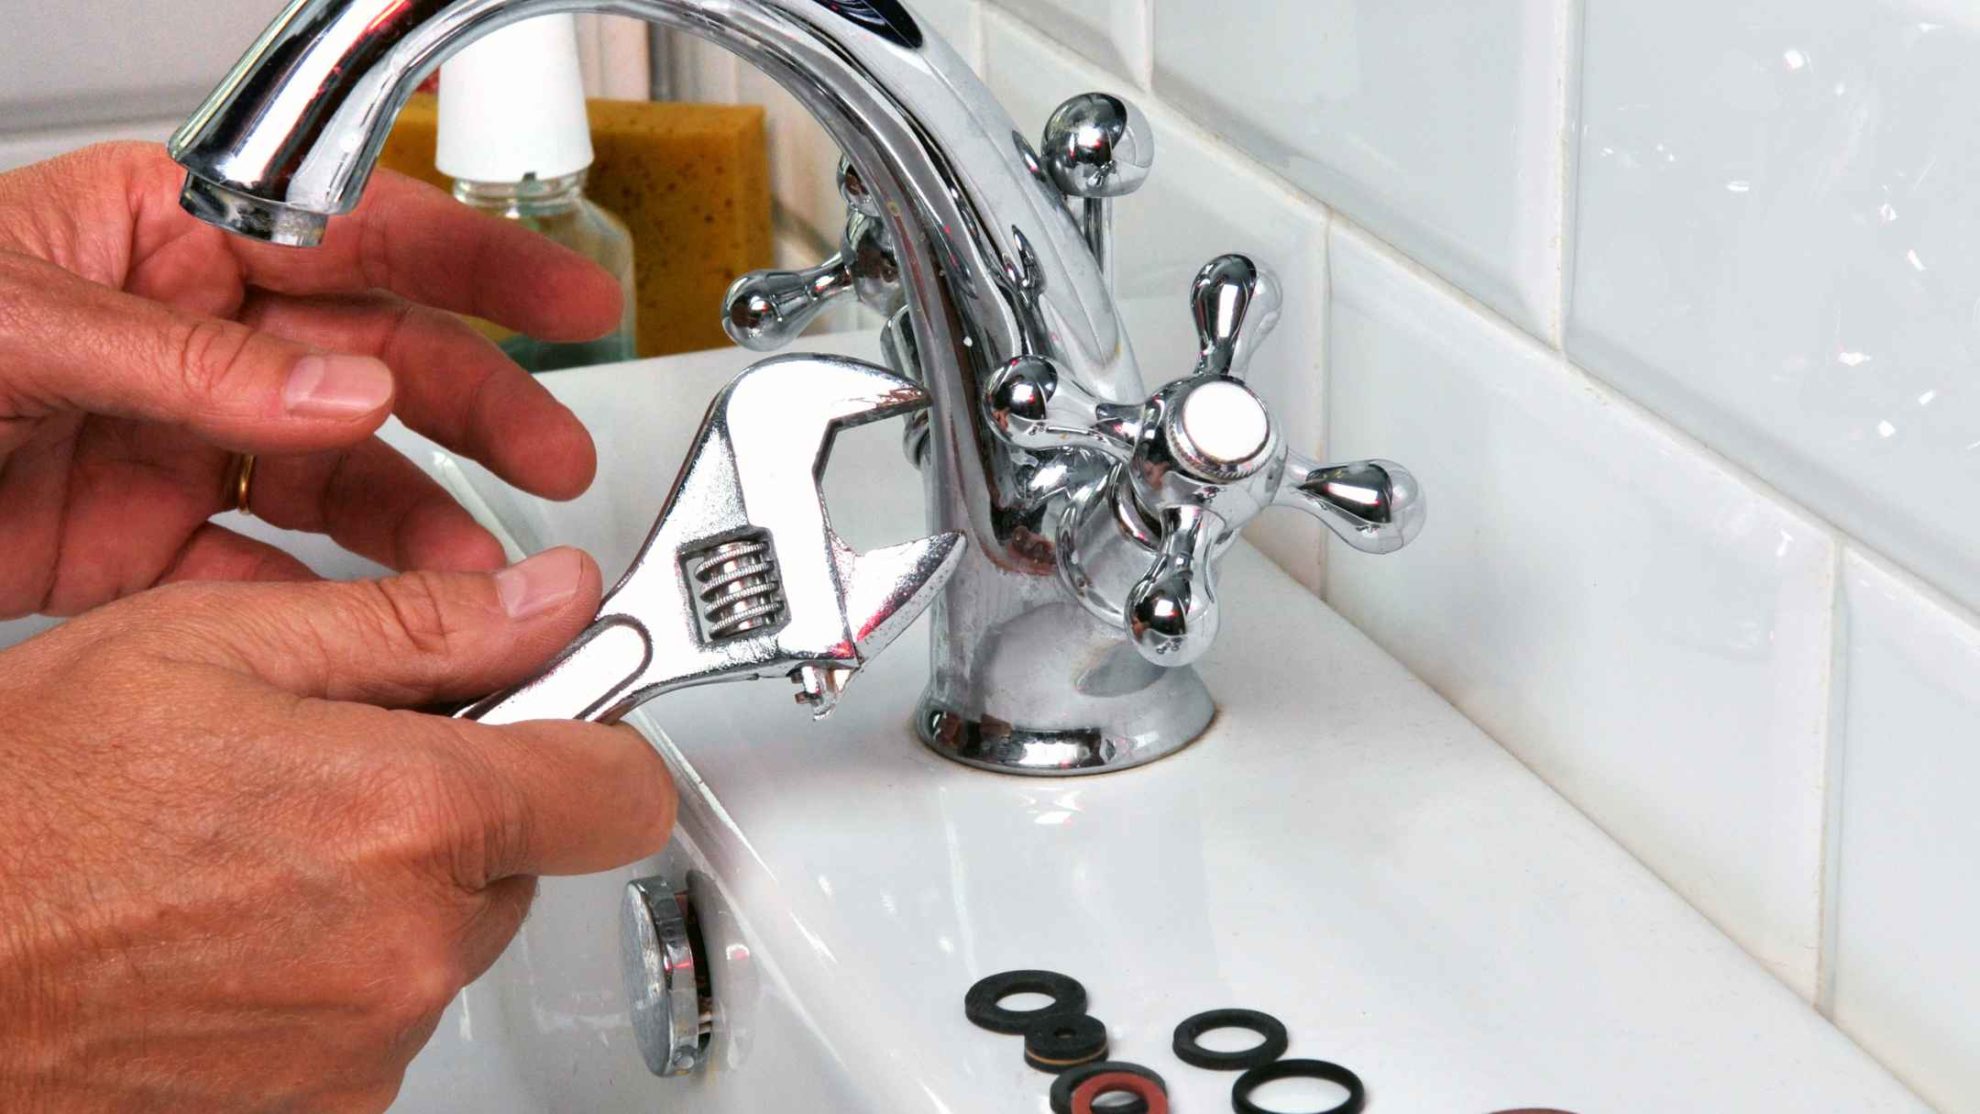 Work With an Experienced Plumber Sanford FL